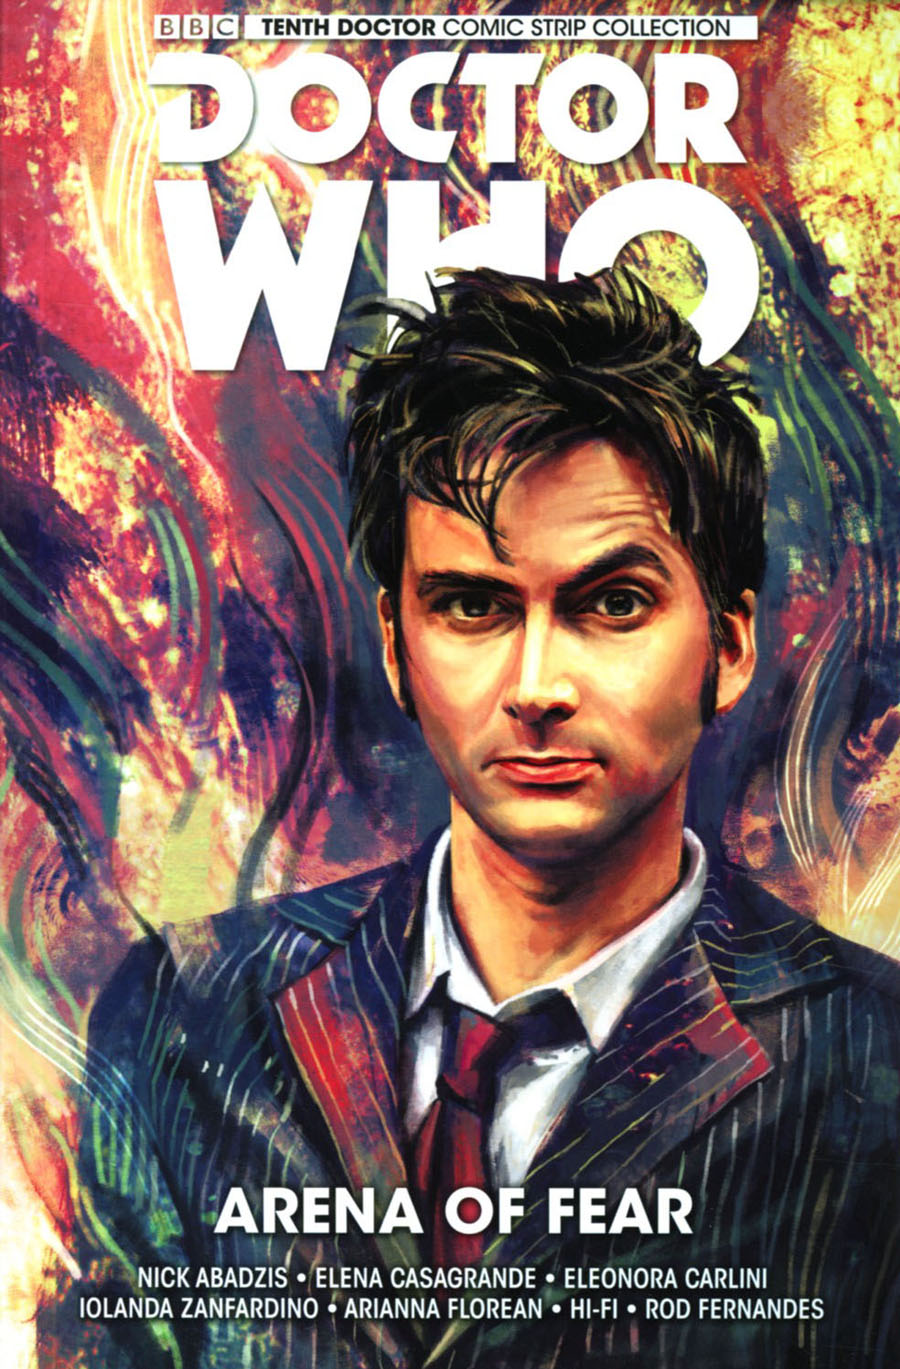 Doctor Who 10th Doctor Vol 5 Arena Of Fear TP